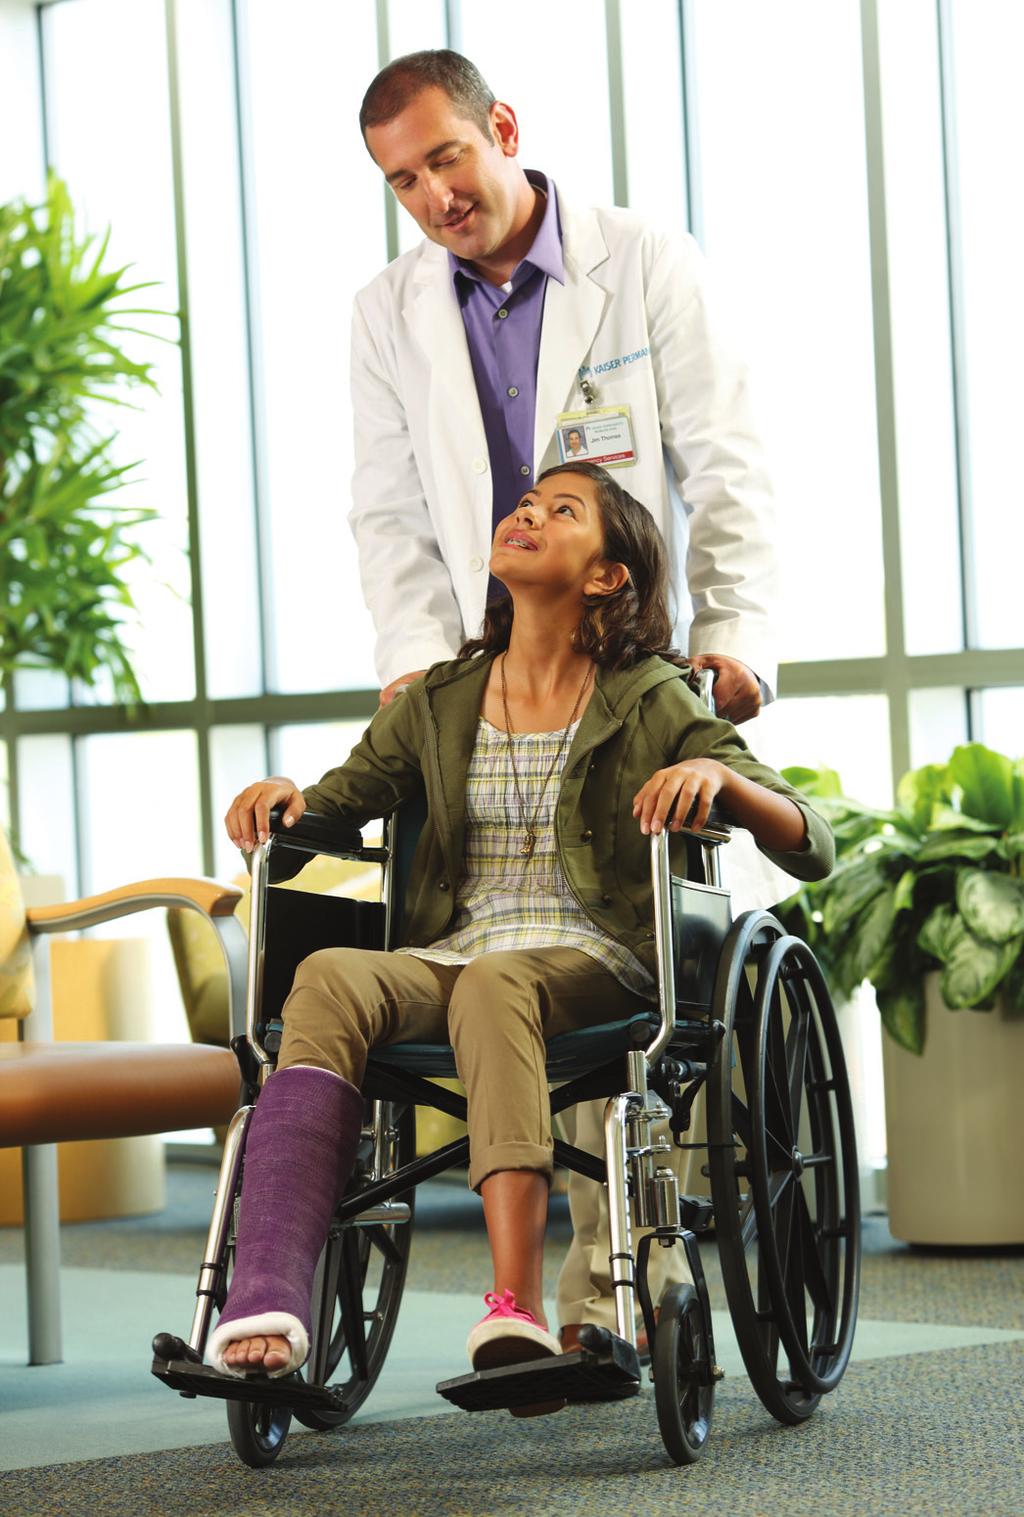 In addition to our inpatient services at Kaiser Sunnyside Medical Center, we offer a variety of outpatient specialty services at facilities across the region, such as: Oncology Patients at our